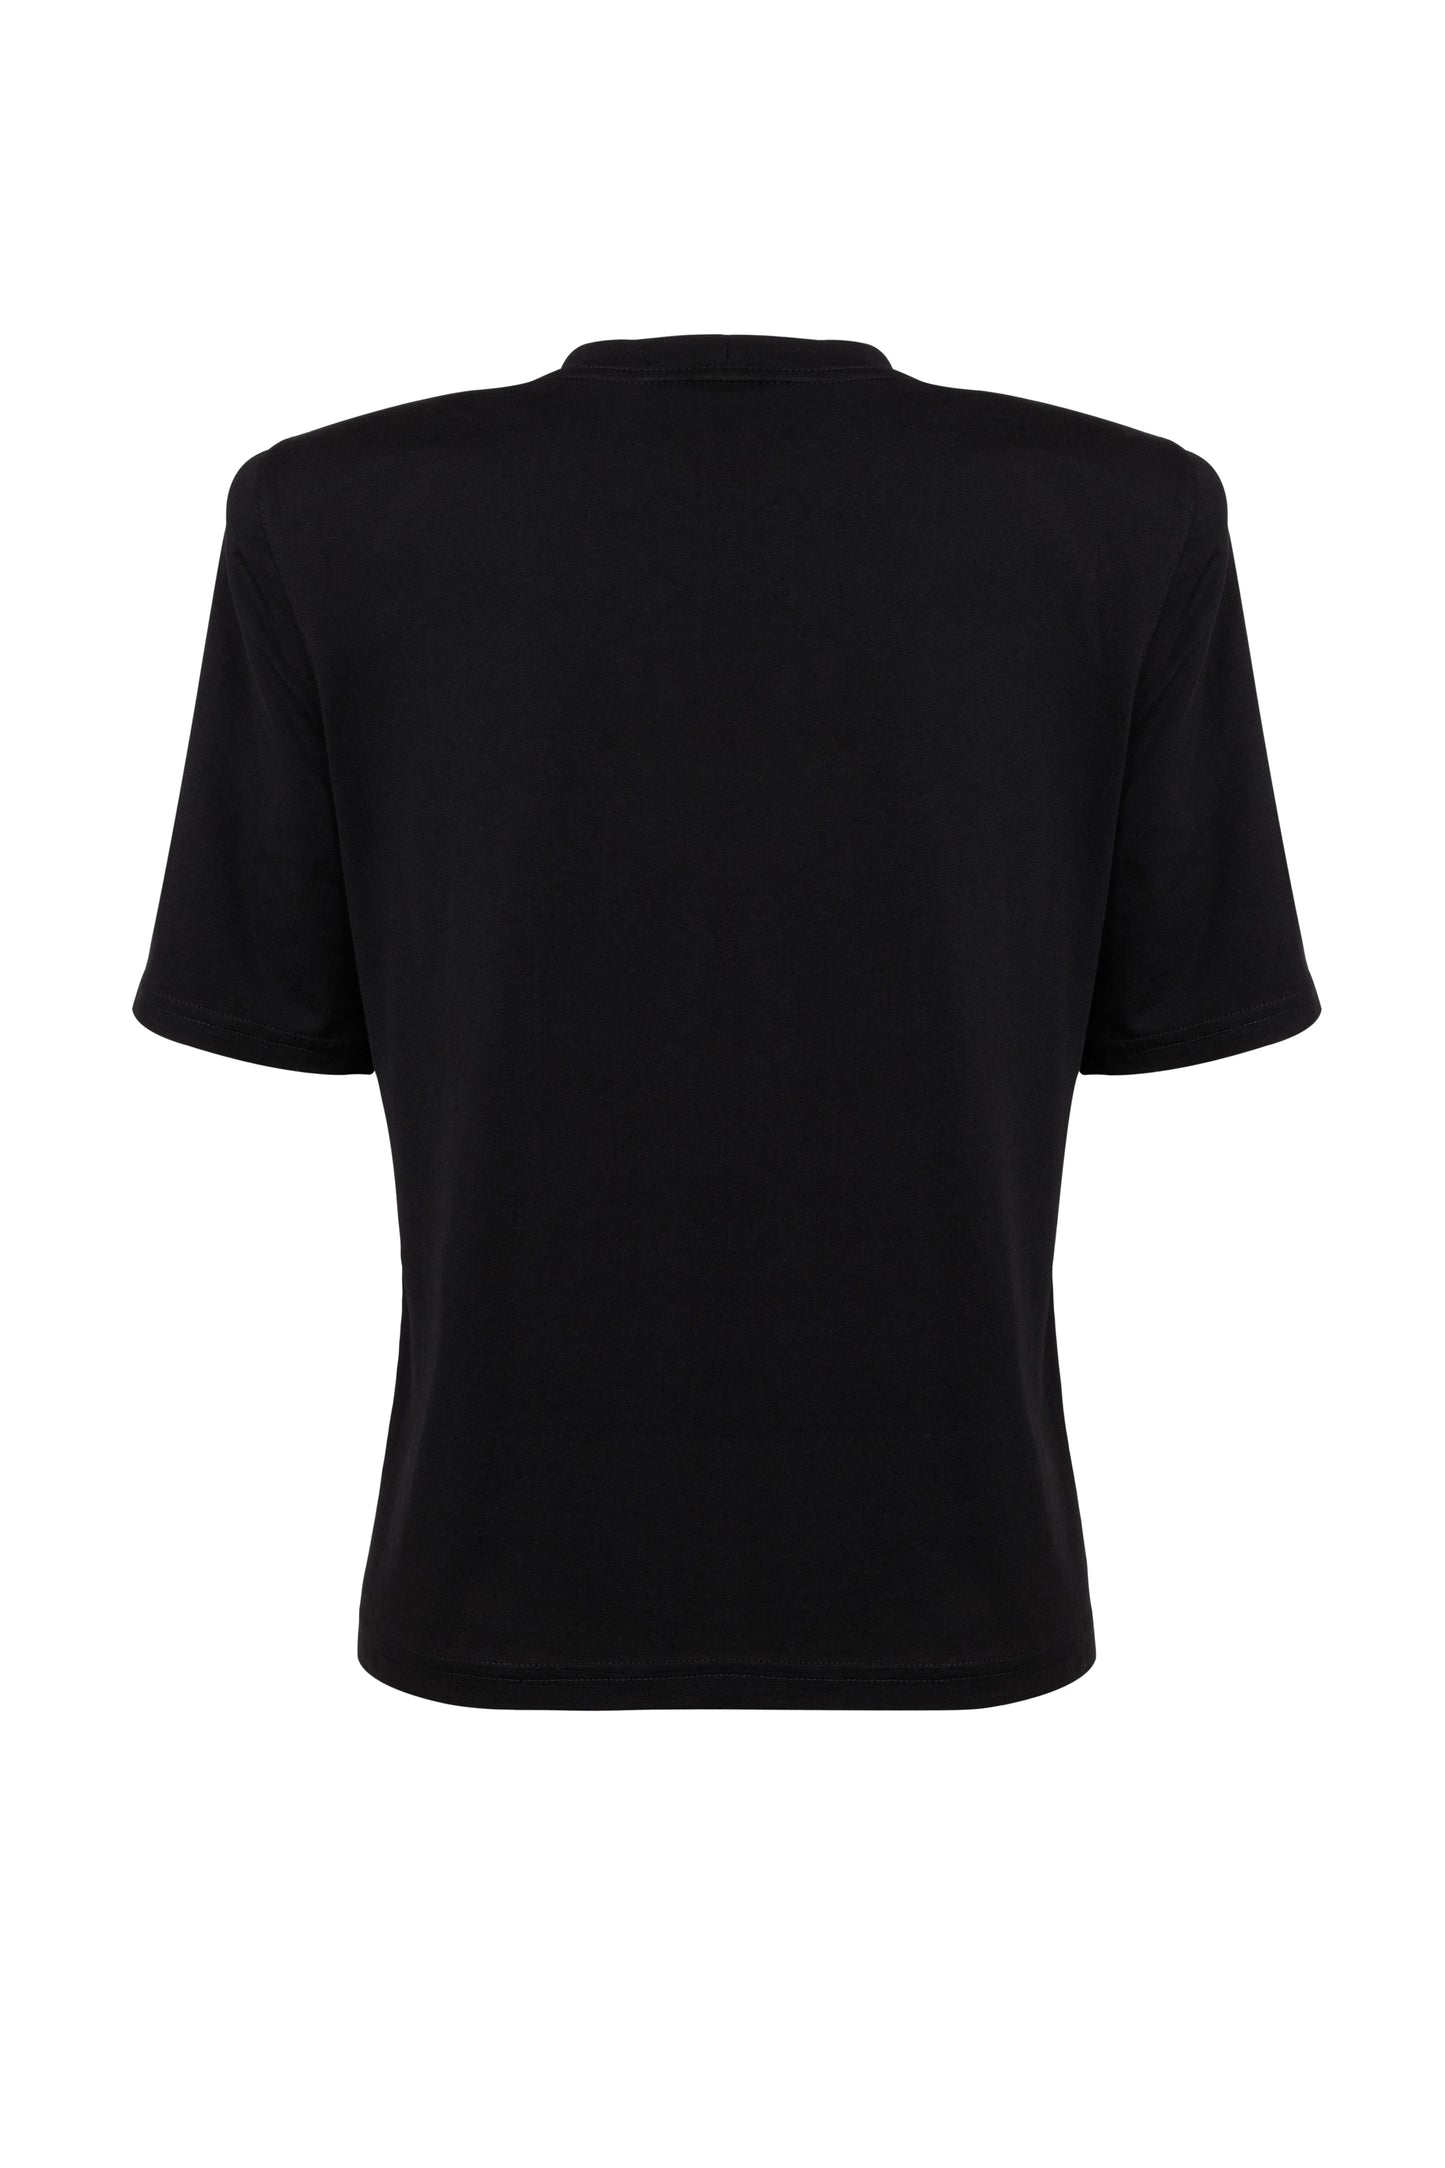 Black, oversized silhouette t-shirt with face embroidery in white. The embroidery is in the upper frontal centre of the t-shirt. The fabric is from 100% eco-friendly cotton. It's photographed from the back on white background.